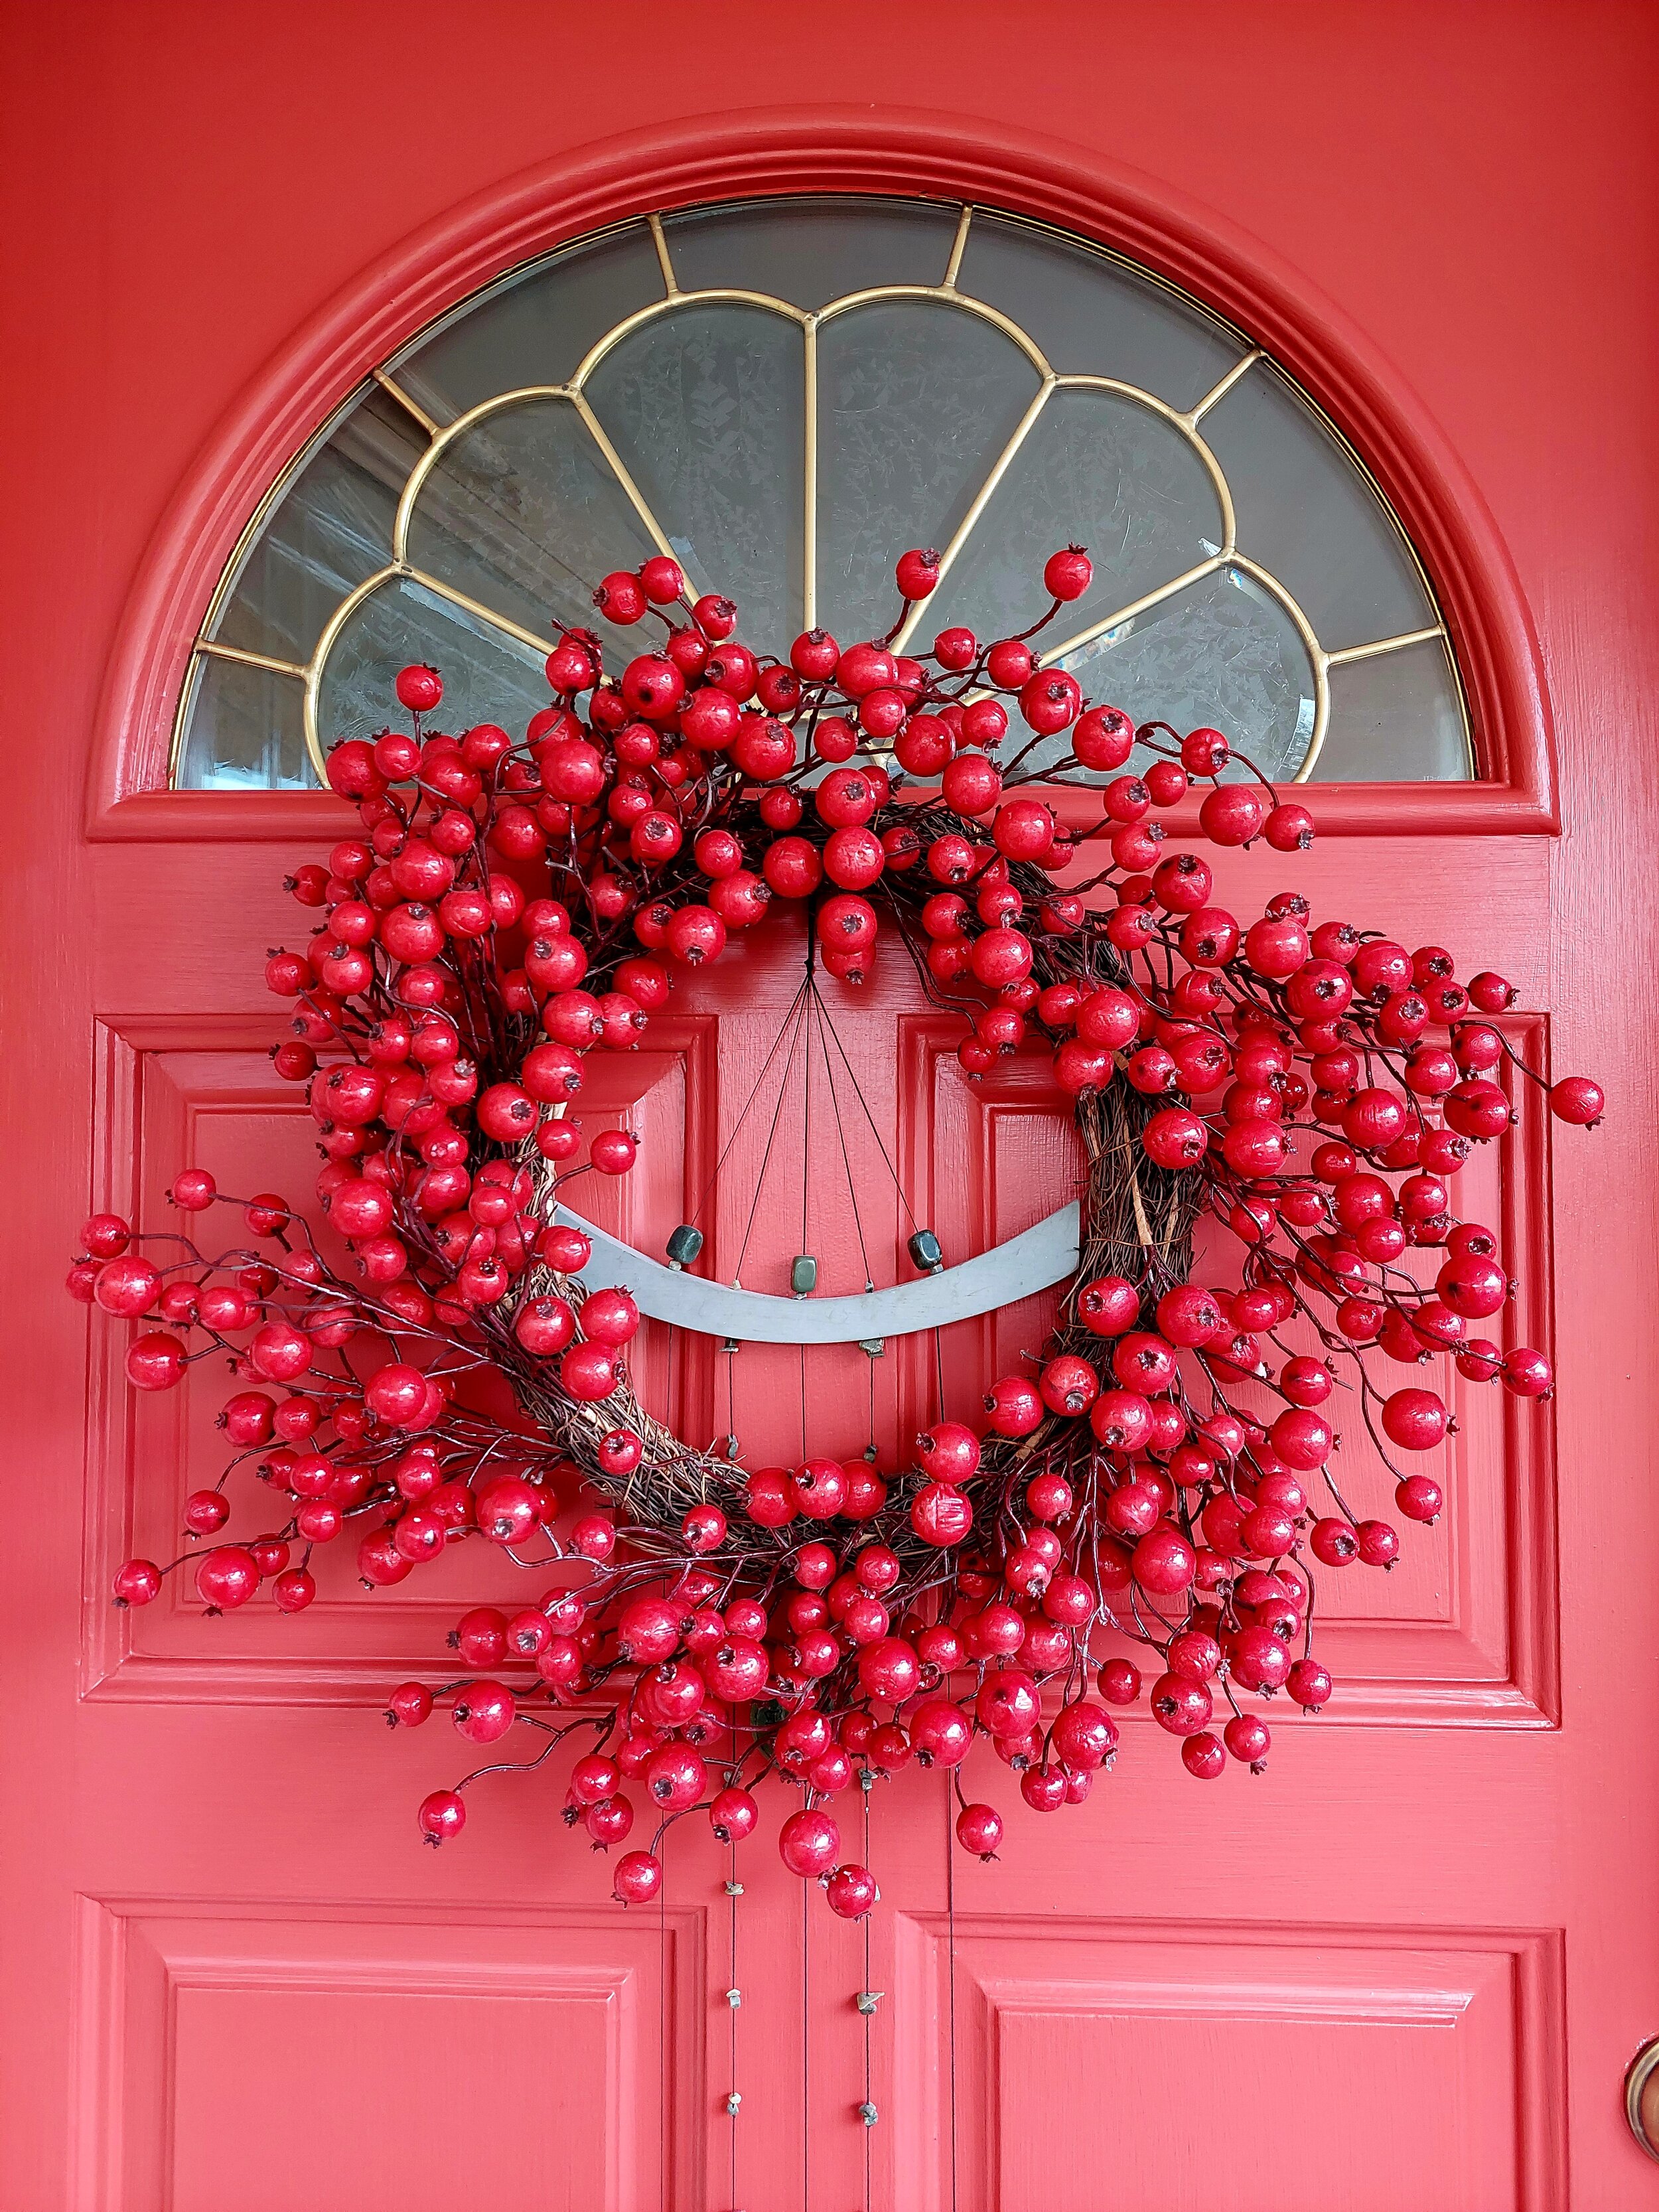 3rd place - My Front Door - Carole Kincaid